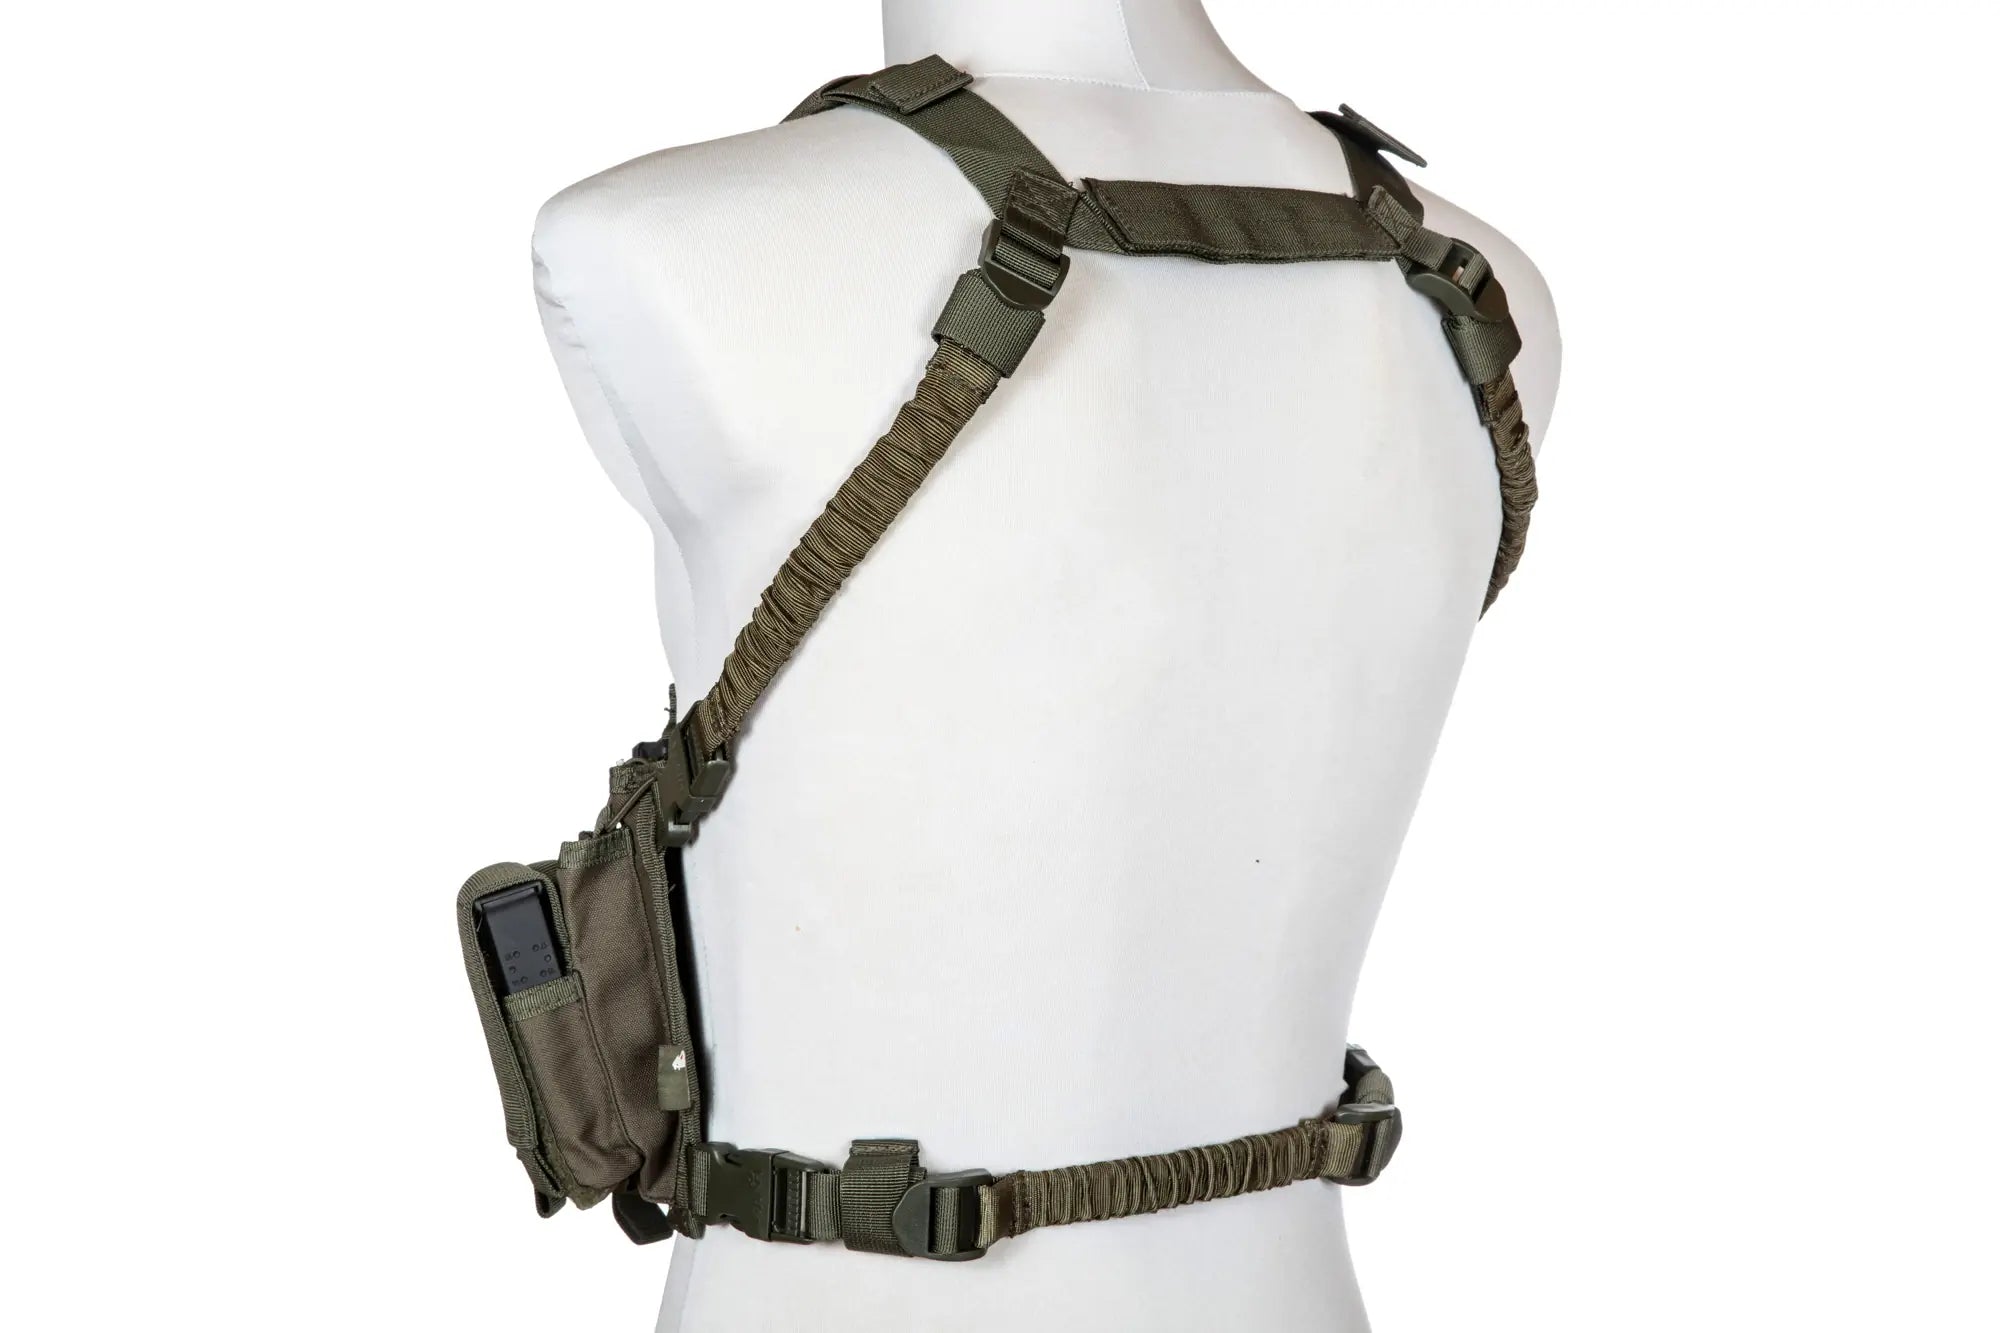 Special Ops Chestrig Tactical Vest - Green-5